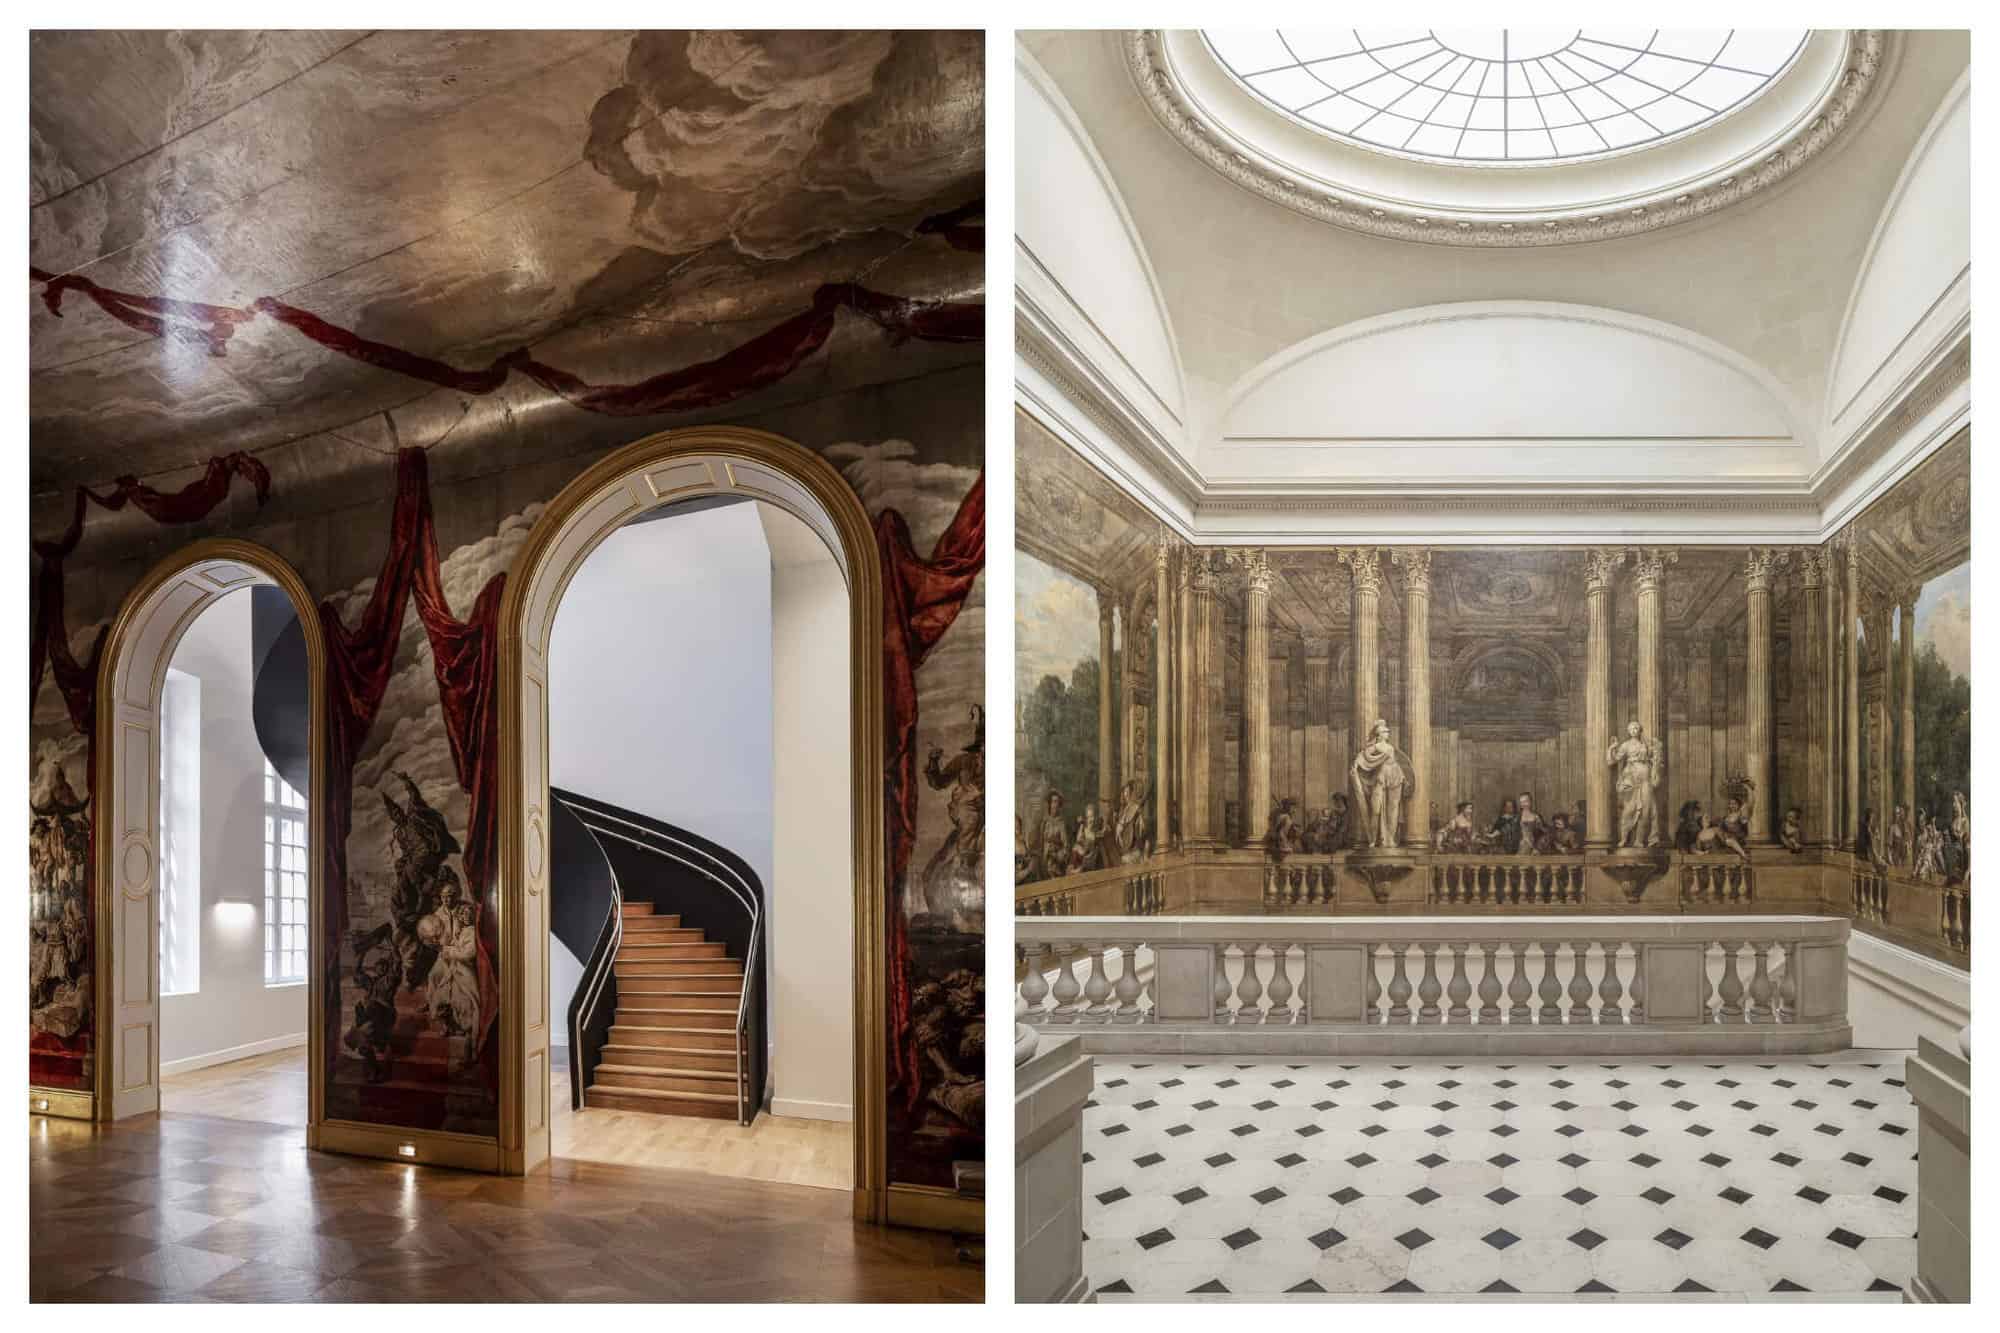 Two interior shots of the Musee Carnavalet showing painted frescoes, marble, and a staircase.